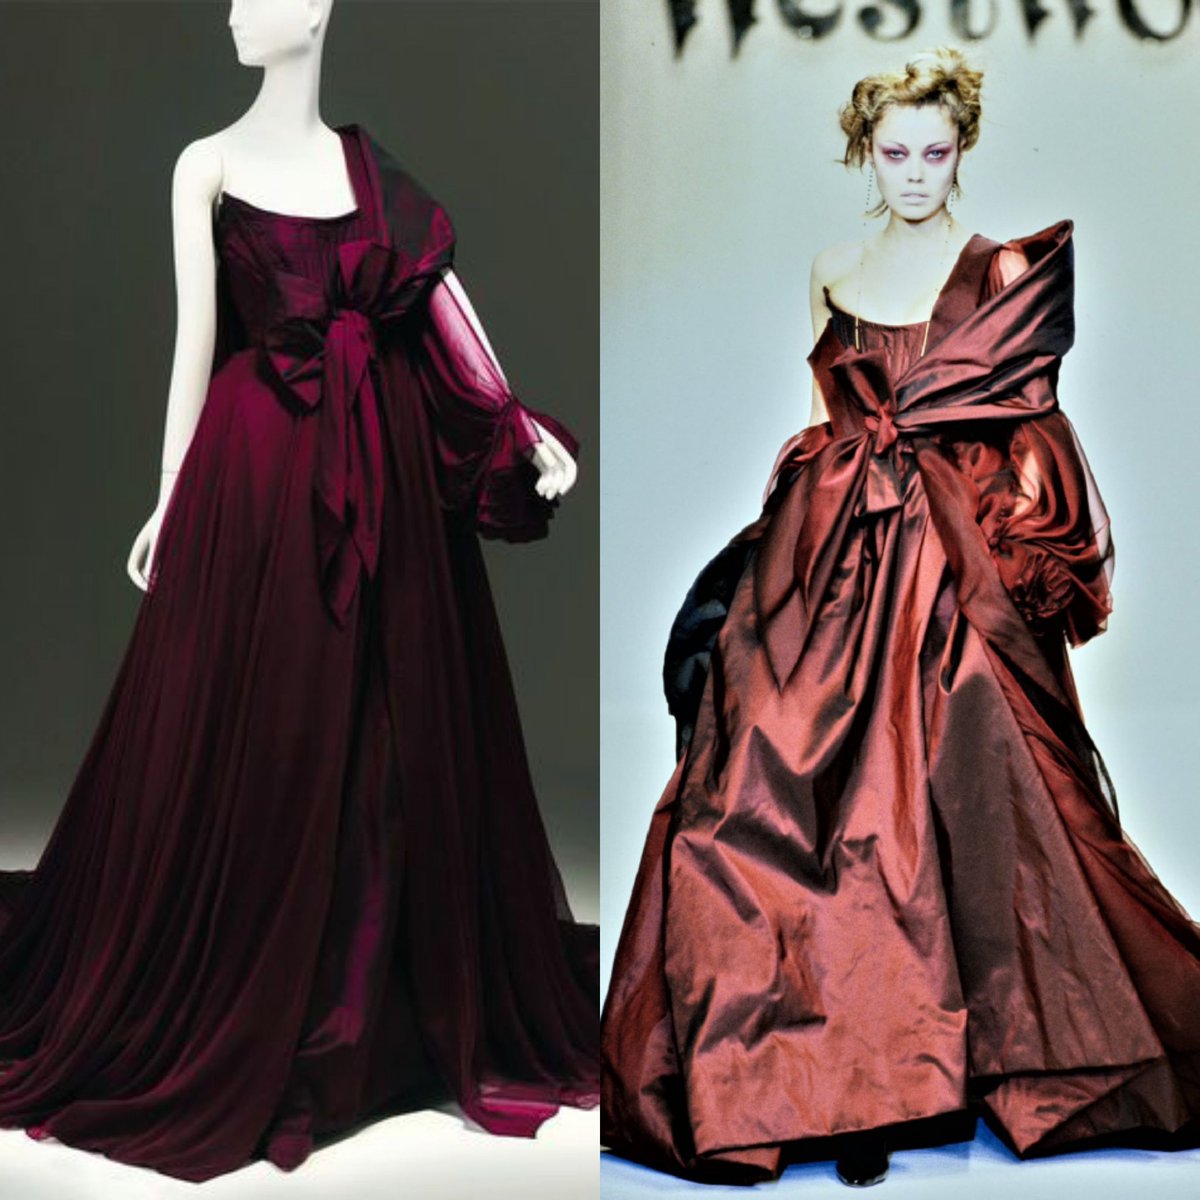 Fashion designer and activist Dame Vivienne Westwood was born #OnThisDay in 1941. She designed this burgundy silk chiffon and silk taffeta evening gown for her Storm in a Teacup A/W 1996/7 collection. From the collection of the model Tatiana Sorokko. #fashiondesigner #dress